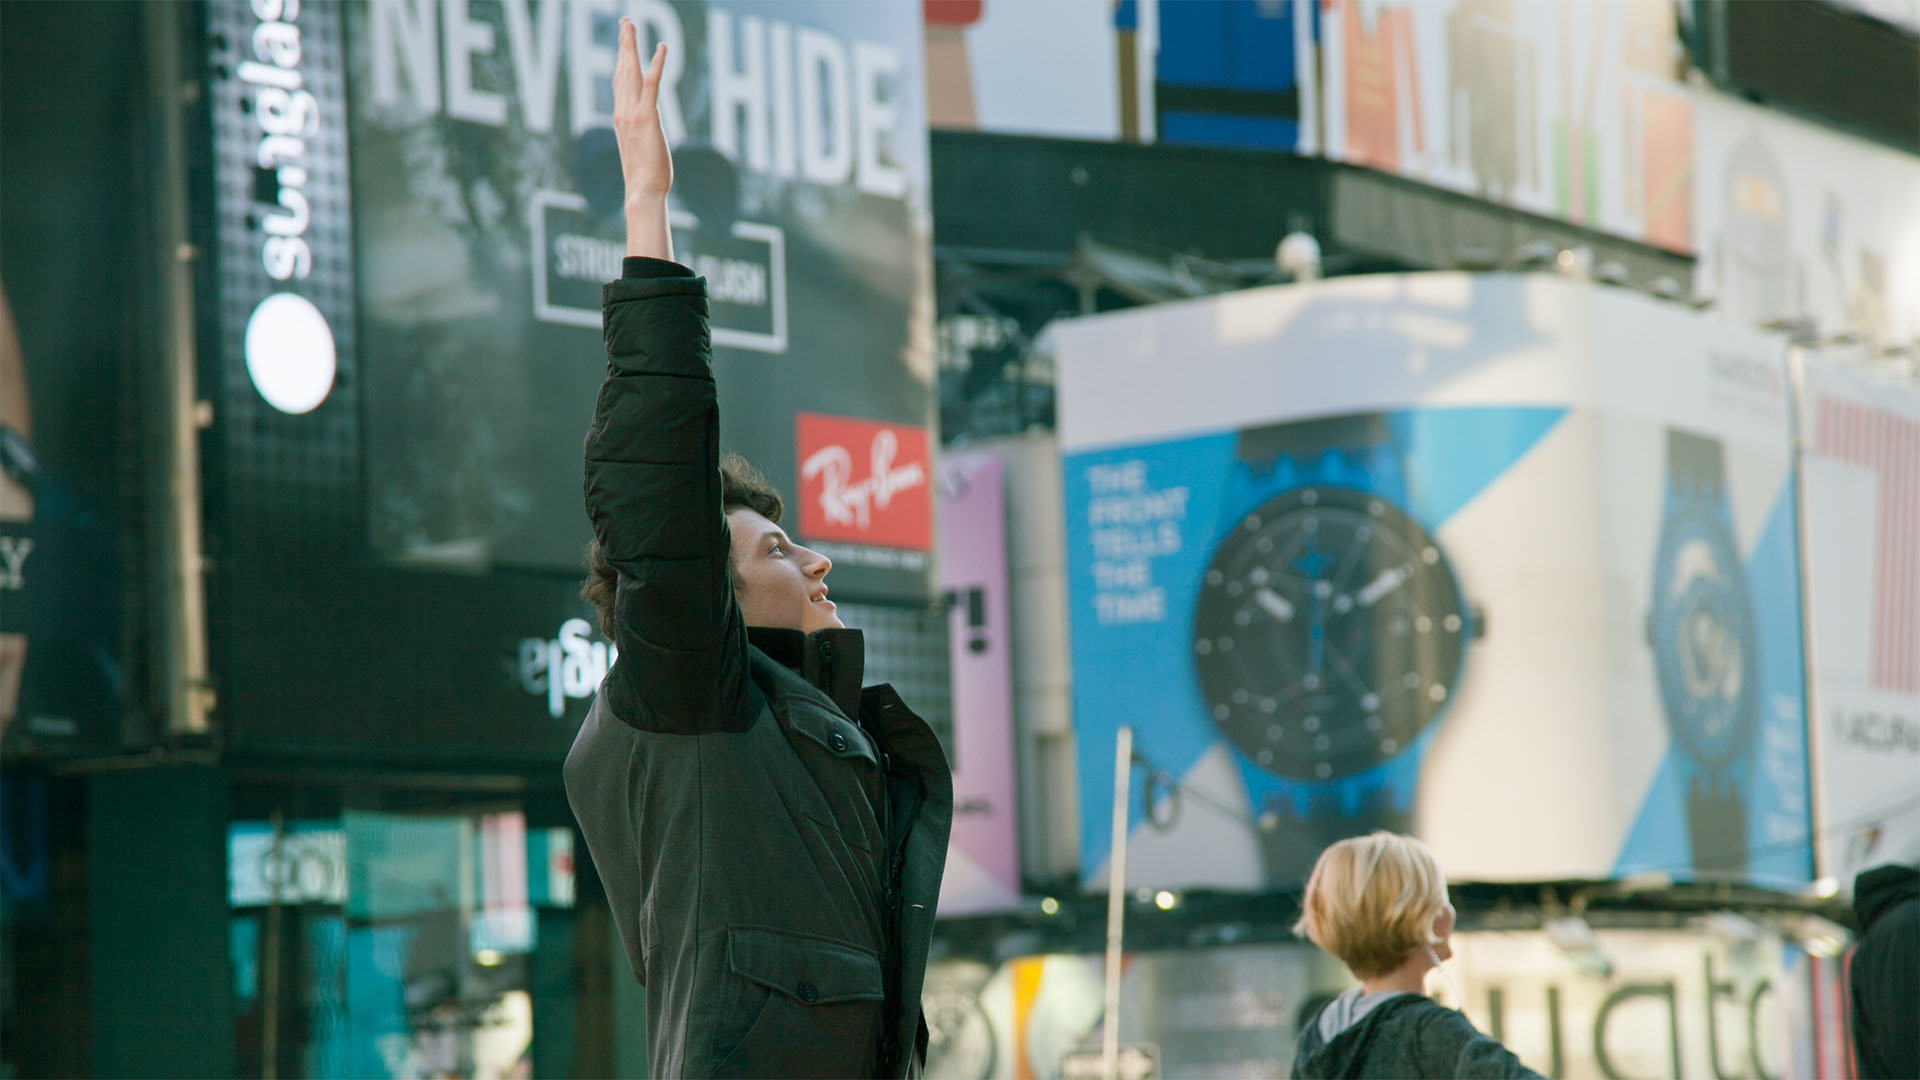 Google Androidify Kinect Game in Times Square New York City